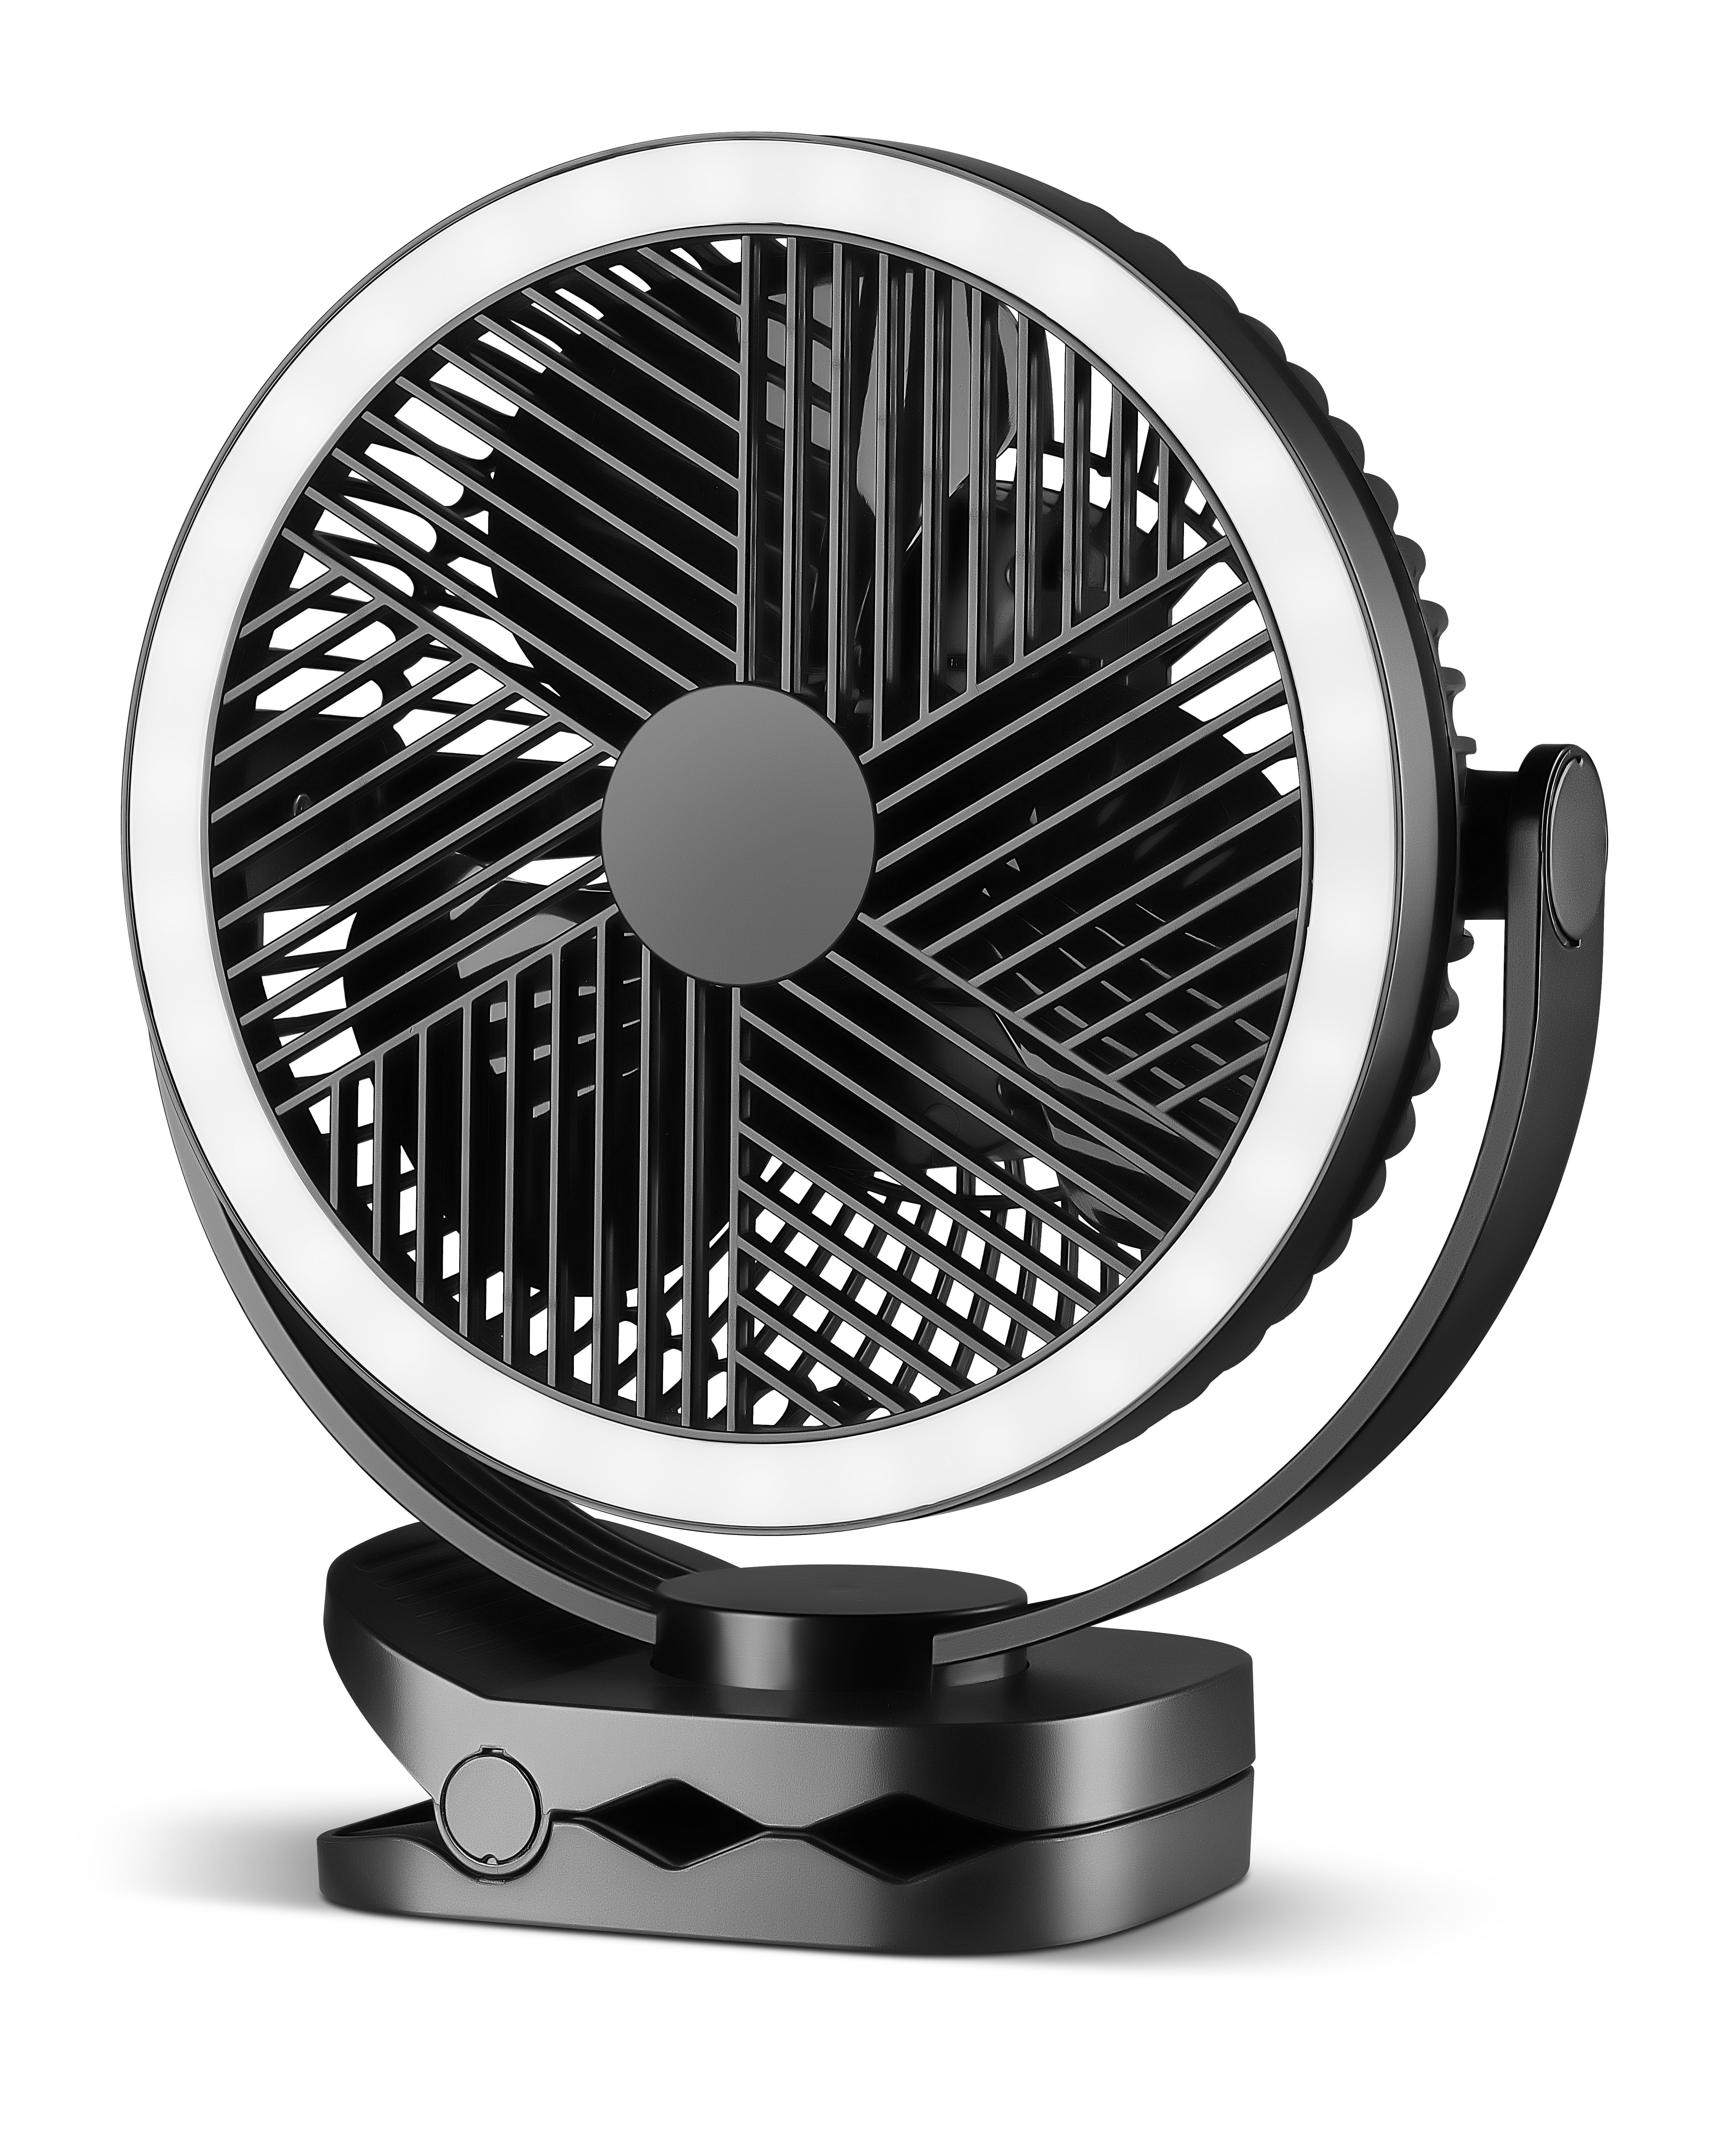 Rotating Fan for for Smart Phone/Laptop/Tablet/Wall Charger with Micro USB or Type C Port USB 2-in-1 Fans for Home Yard Outdoor Travel HIjing Mini Portable Mobile Fan Cell Phone White